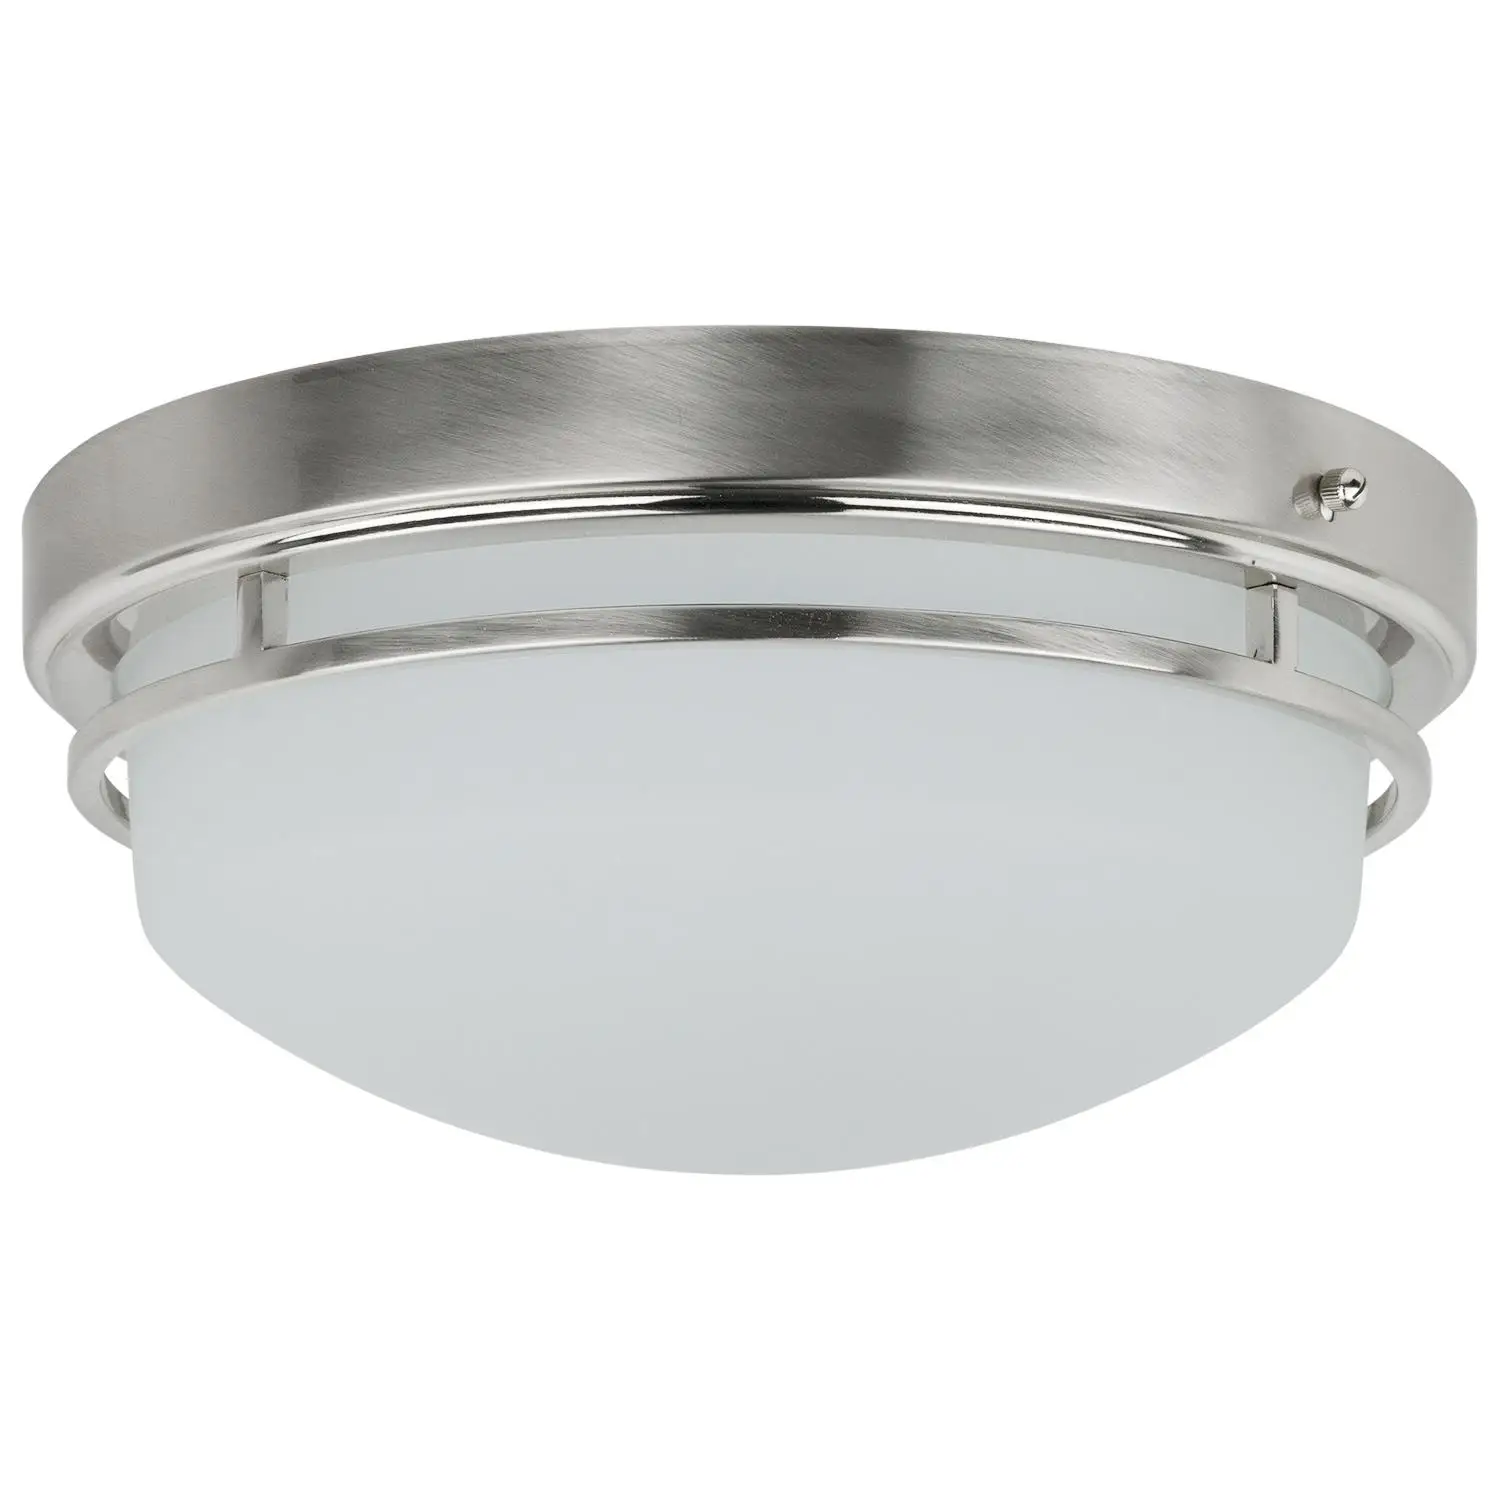 Sunlite LED Dome Light Fixture, 20W (60W Equivalent), 1400 Lumen, Brushed Nickel, Frosted Shade, 50,000 Hour, 3000K 13 Inch